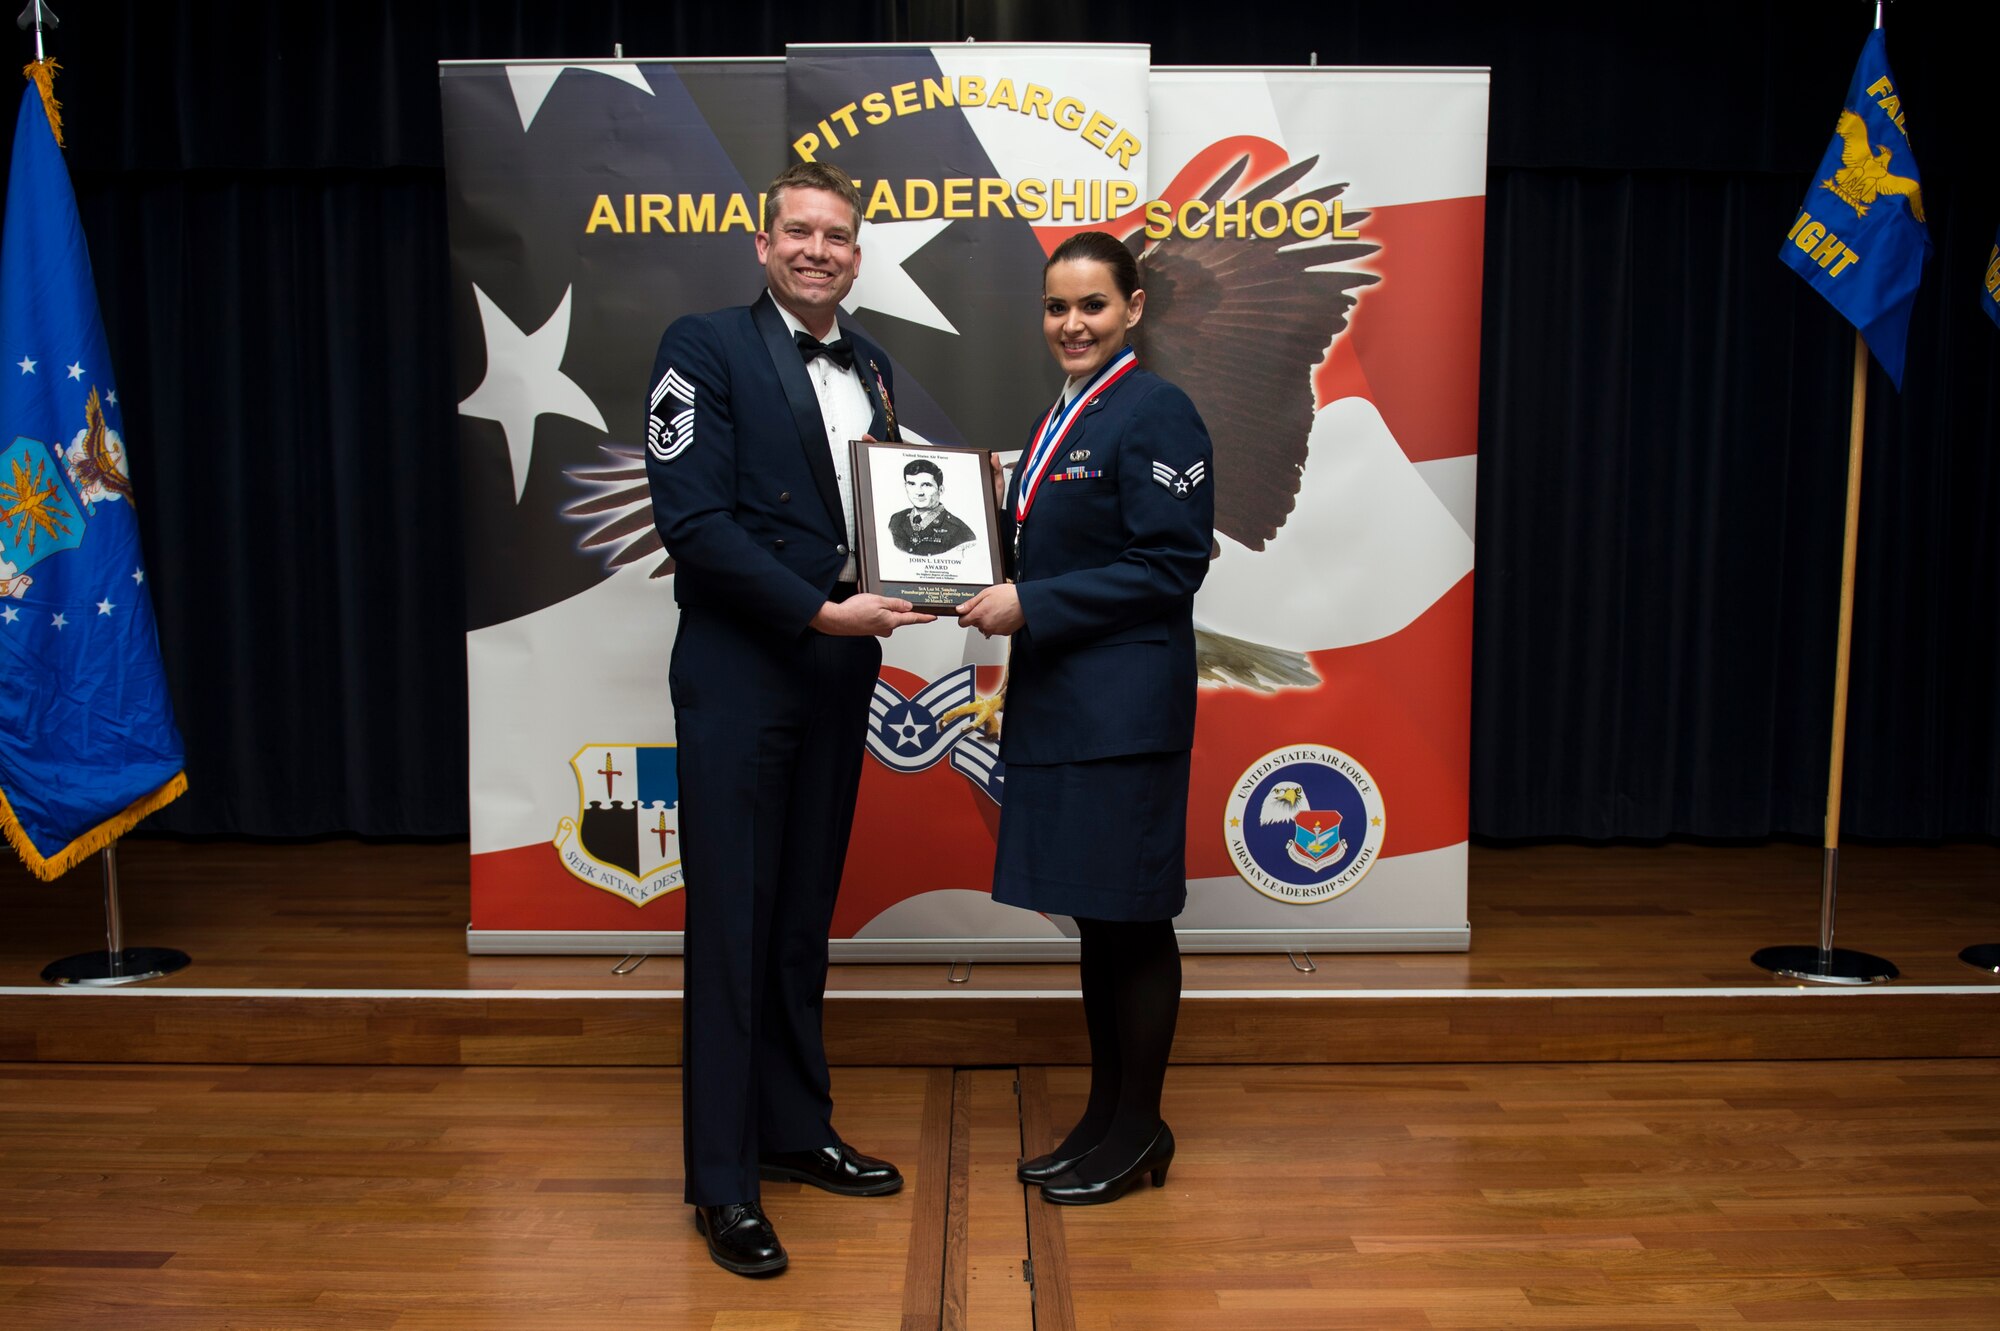 U.S. Air Force Senior Airman Luz Sanchez, right, 702nd Munitions Support Squadron emergency action controller, receives the John L. Levitow during the Pitsenbarger Airman Leadership School 17-C graduation at Club Eifel on Spangdahlem Air Base, Germany, Mar. 30, 2017. The Levitow award is the highest honor given to the student who displays excellence in all categories of ALS. (U.S. Air Force photo by Airman 1st Class Preston Cherry)